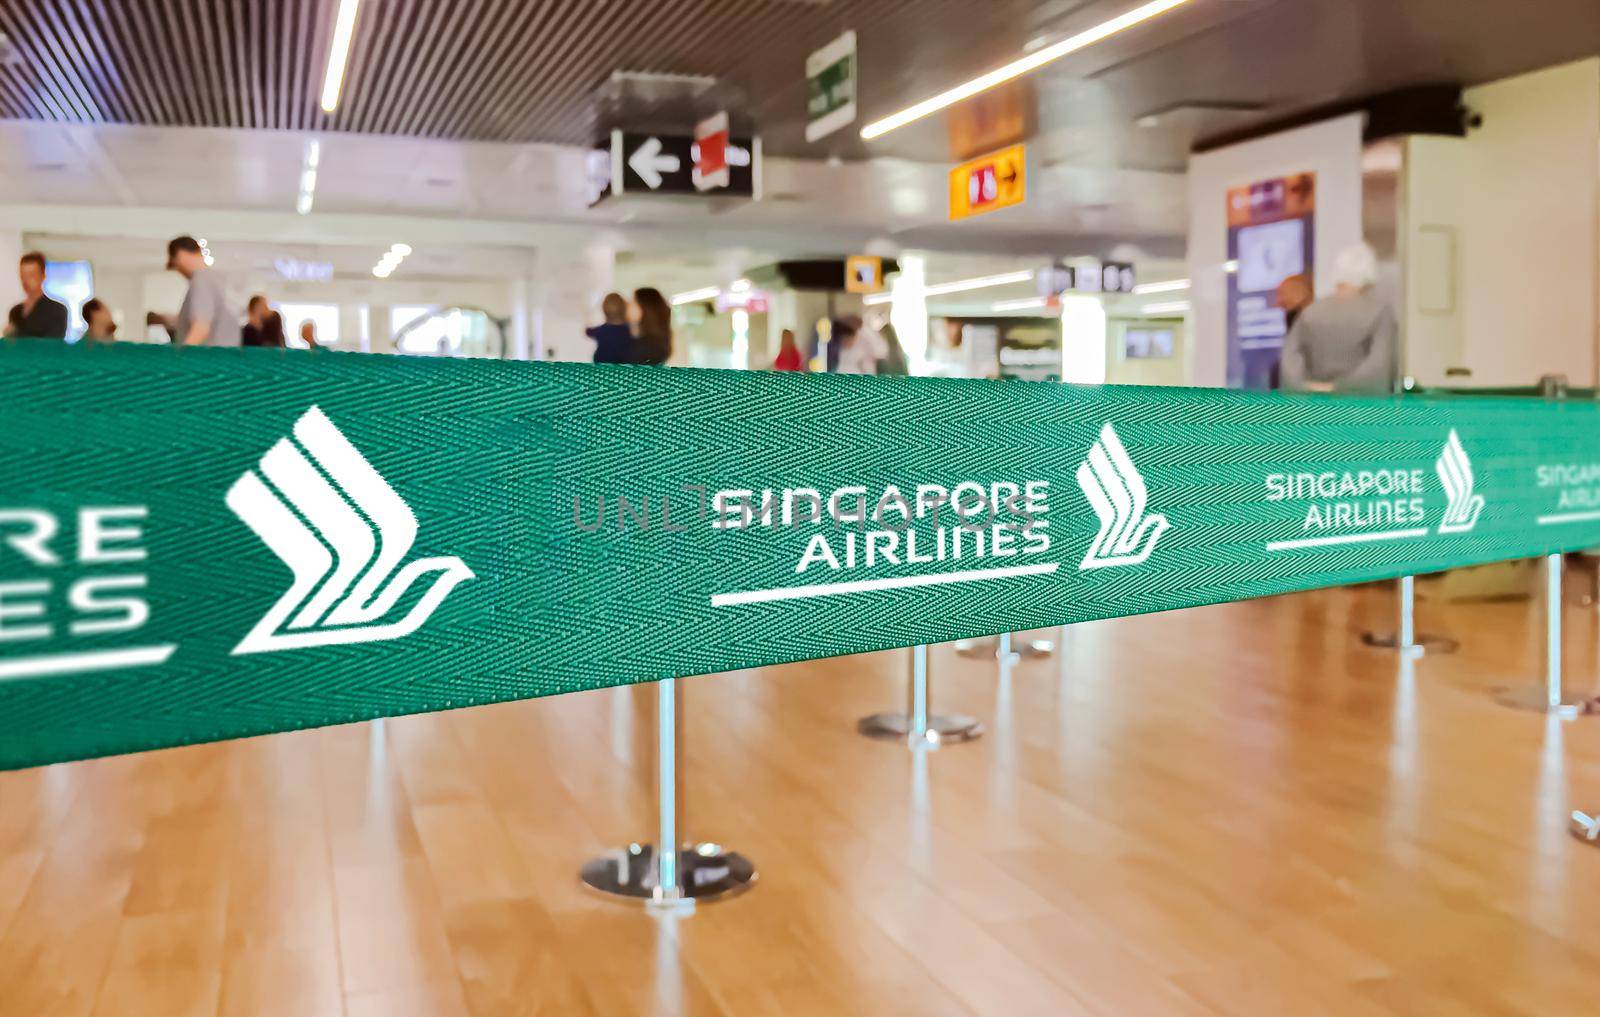 Fiumicino, Italy, July 2019: green ribbon barrier with the Singapore Airlines logo inside the Leonardo da Vinci international airport in Rome Fiumicino in Italy